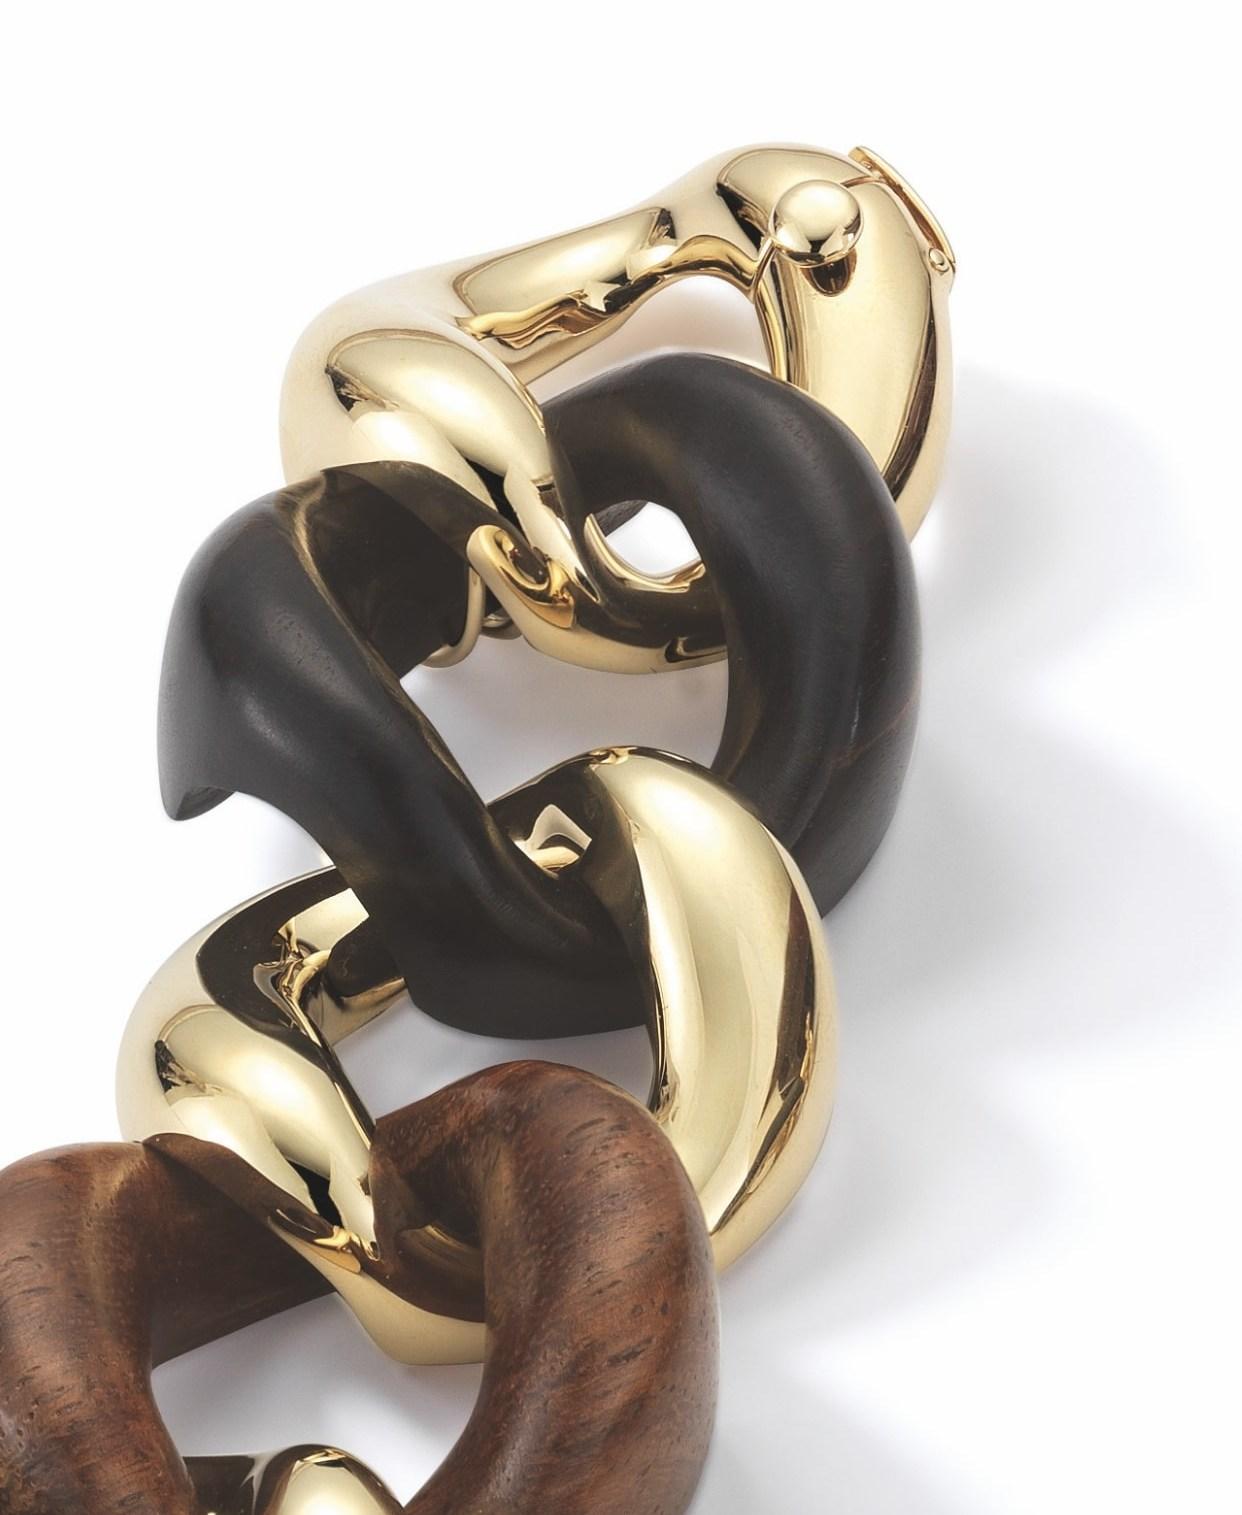 Brand new 18k gold classic large link bracelet featuring rosewood, walnut wood, ebony, and sandal wood links. Crafted by Seaman Schepps. Bracelet measures approximately 7 3/4 inches long, links measure 25mm wide. Weight is 72.5 grams. Marked Seaman